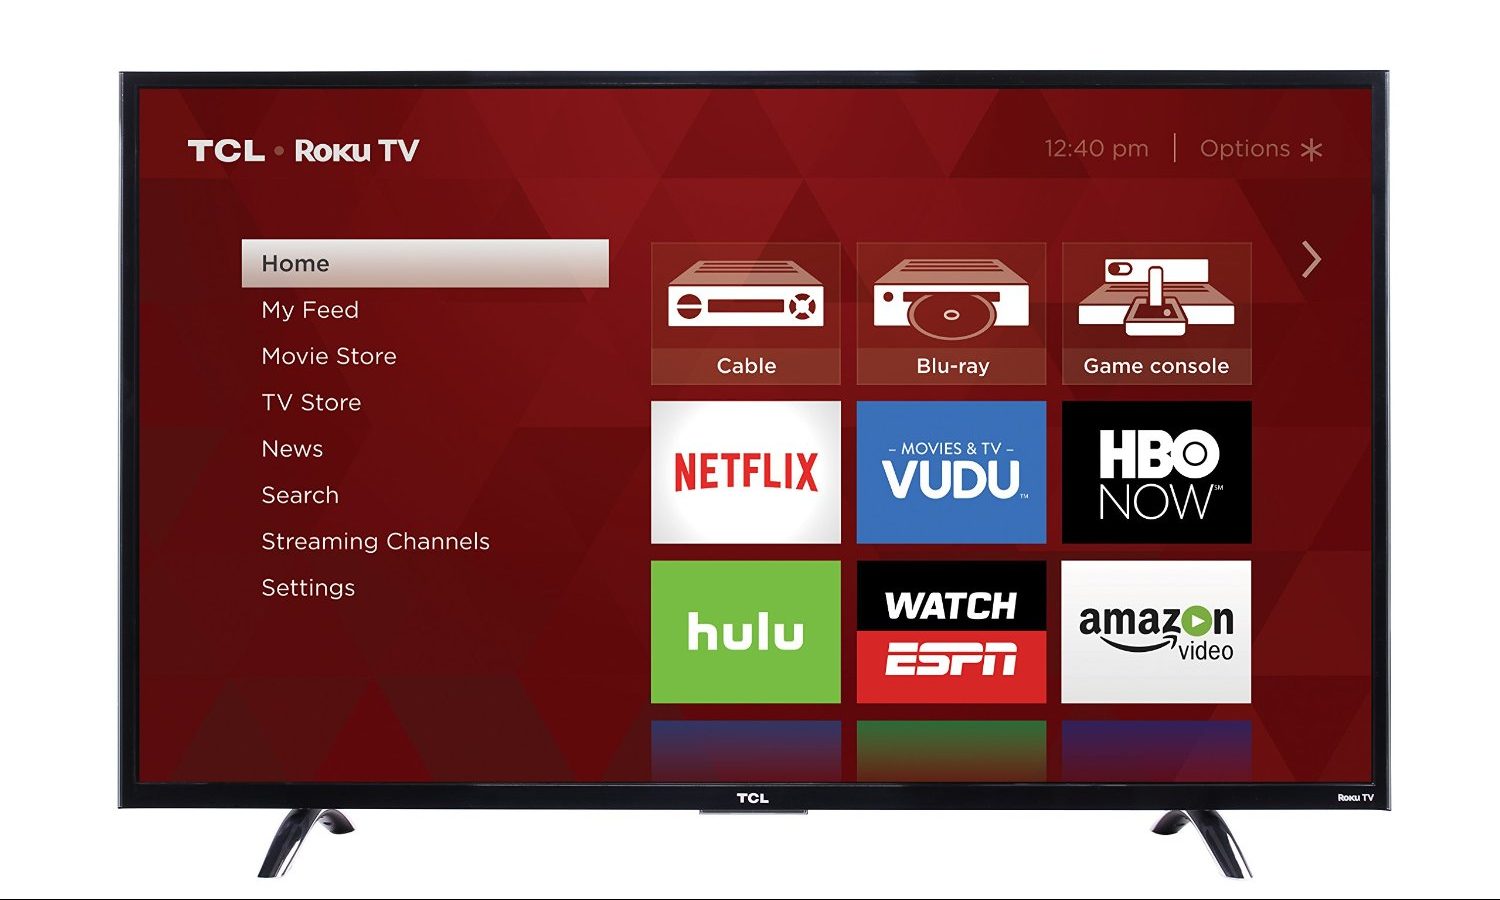 Don’t Forget: We Are Giving Away a 50″ 4K Ultra HD TCL Roku TV